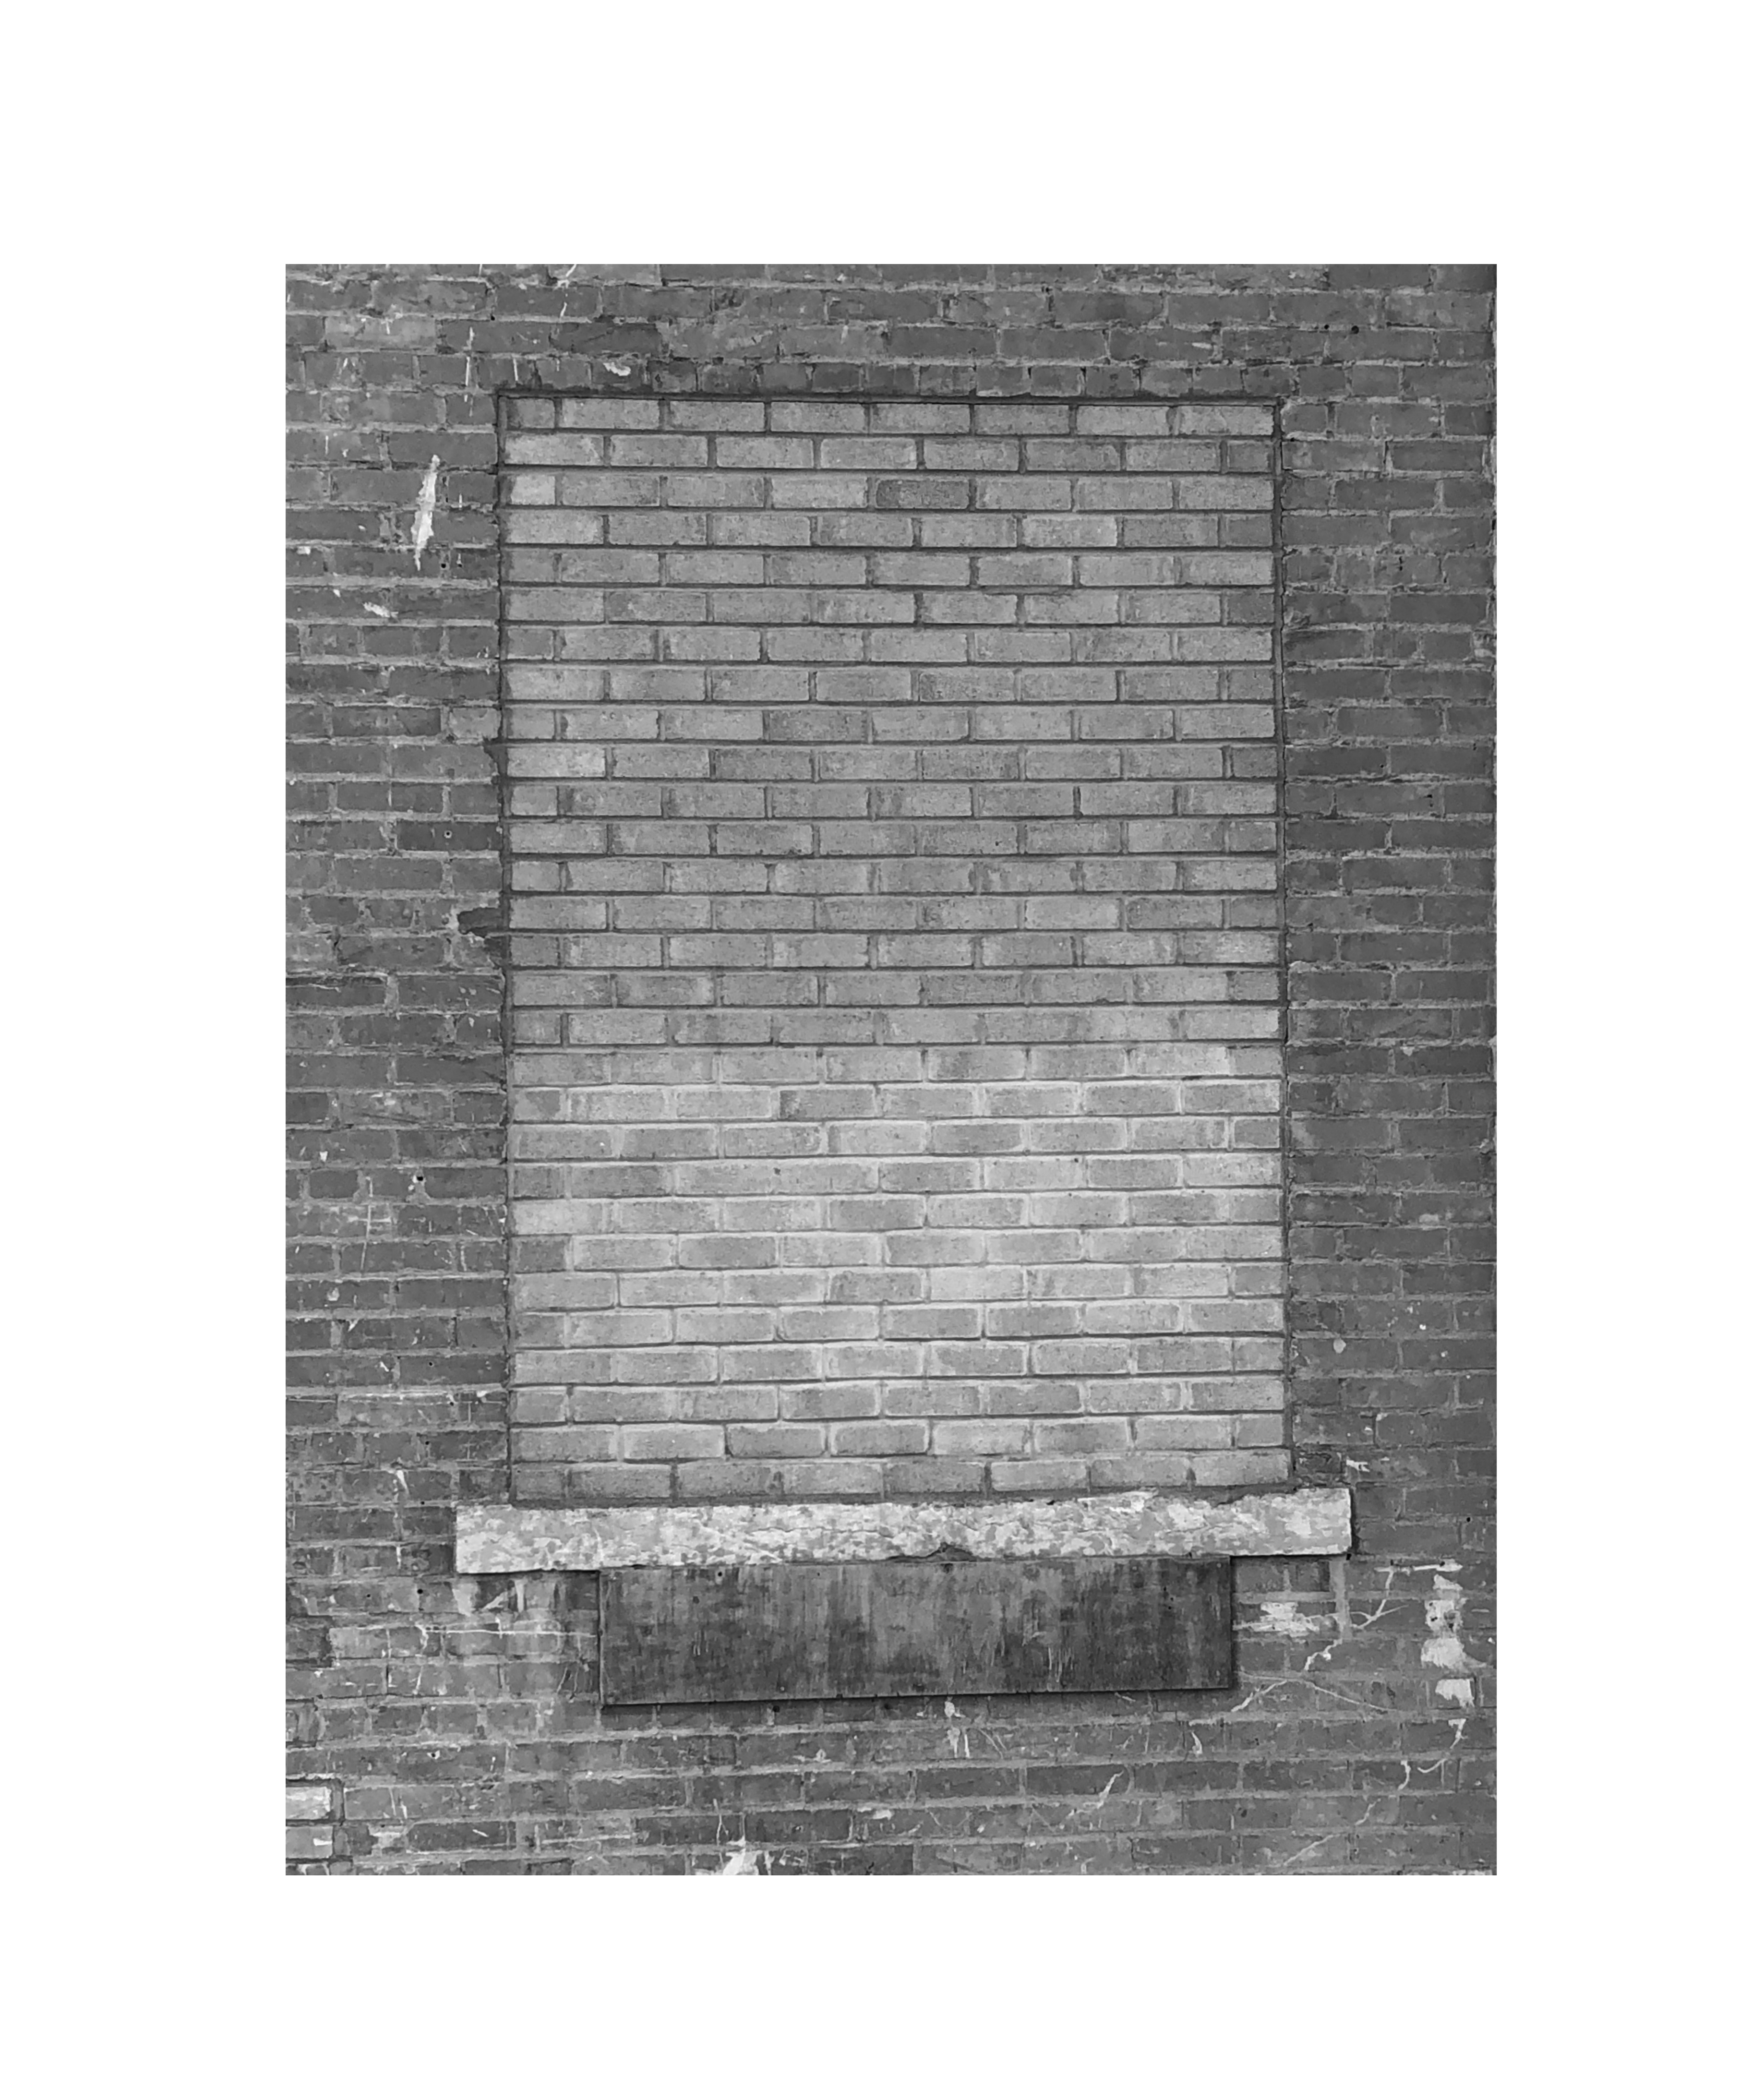 photograph of a bricked up window